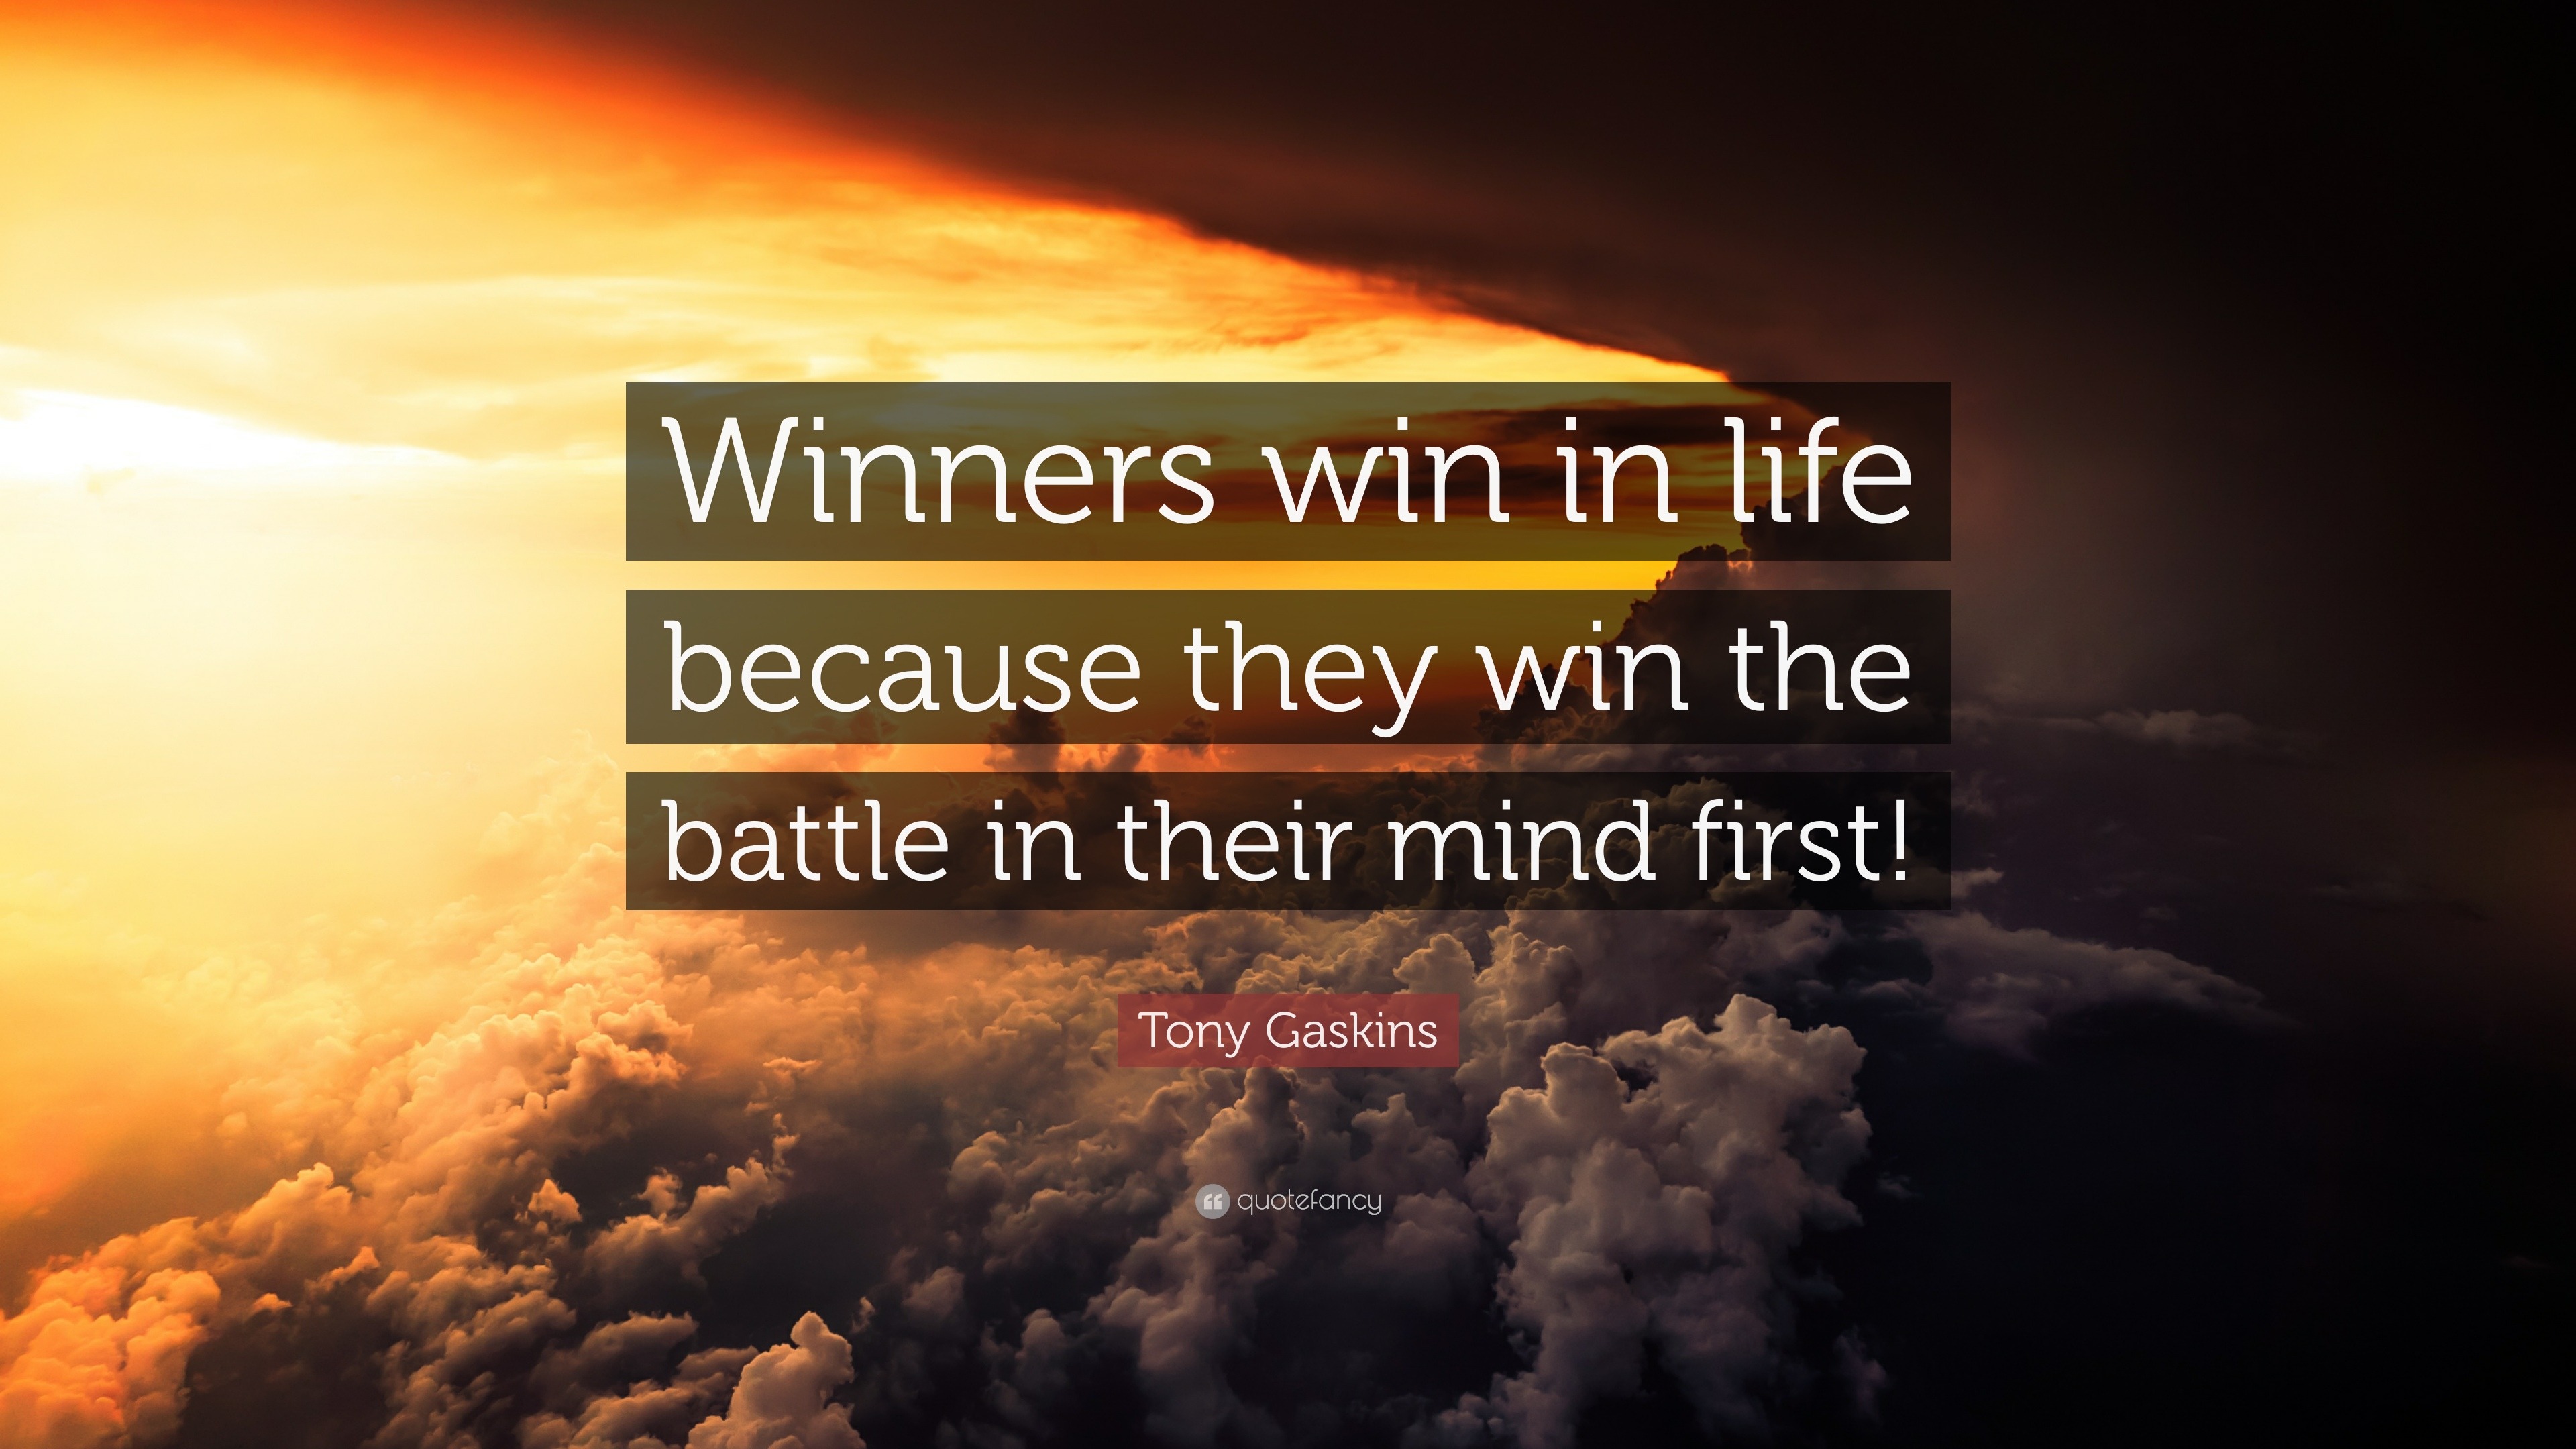 Tony Gaskins Quote “Winners win in life because they win